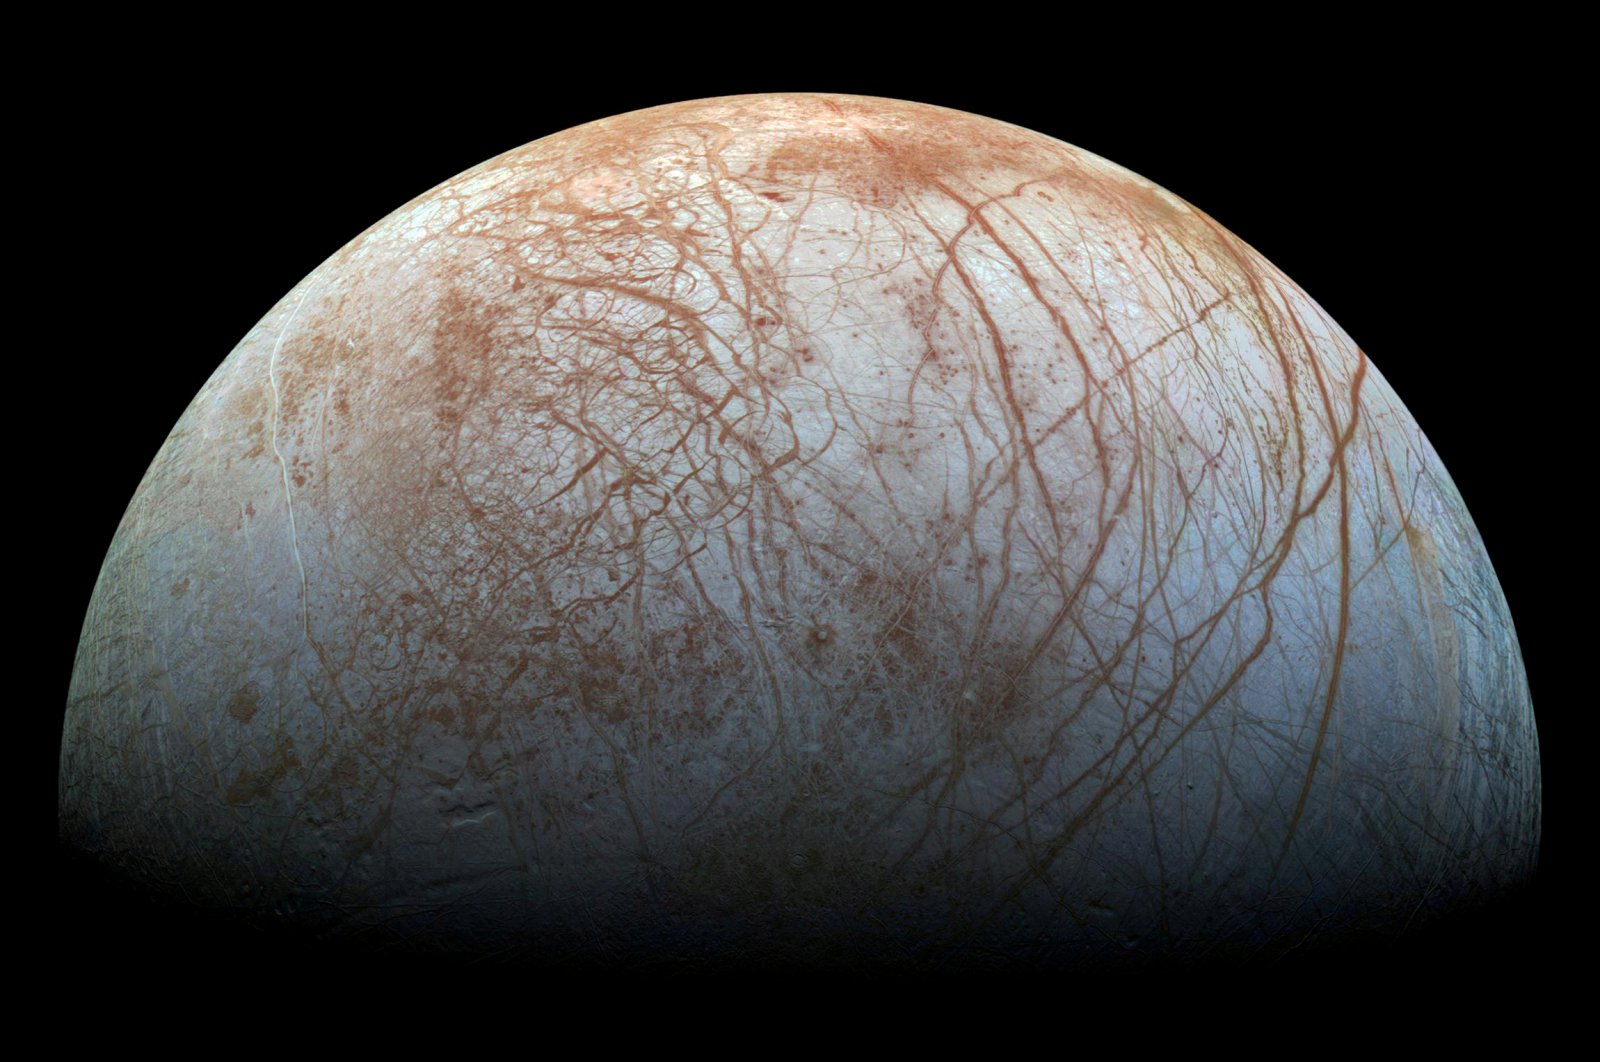 A view of Jupiter's moon Europa created from images taken by NASA's Galileo spacecraft in the late 1990s, obtained by Reuters, May 14, 2018. (NASA / JPL-Caltech / SETI Institute / Handout via Reuters)